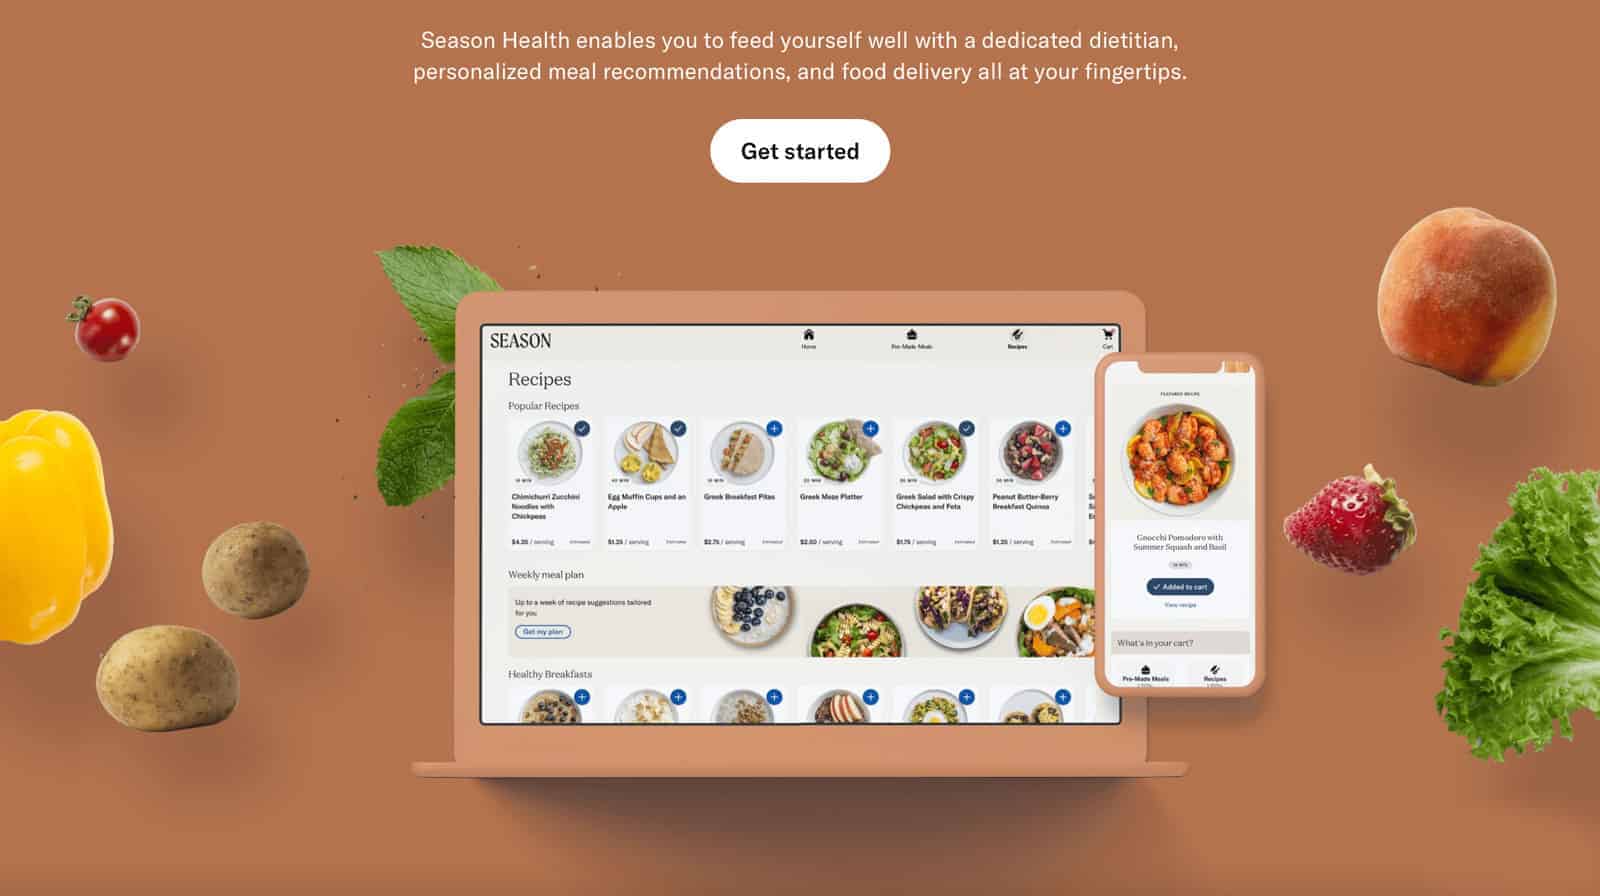 An image of a website header showing a laptop with multiple recipes for the customer to choose from. Fruits and vegetables are shown off the screen.